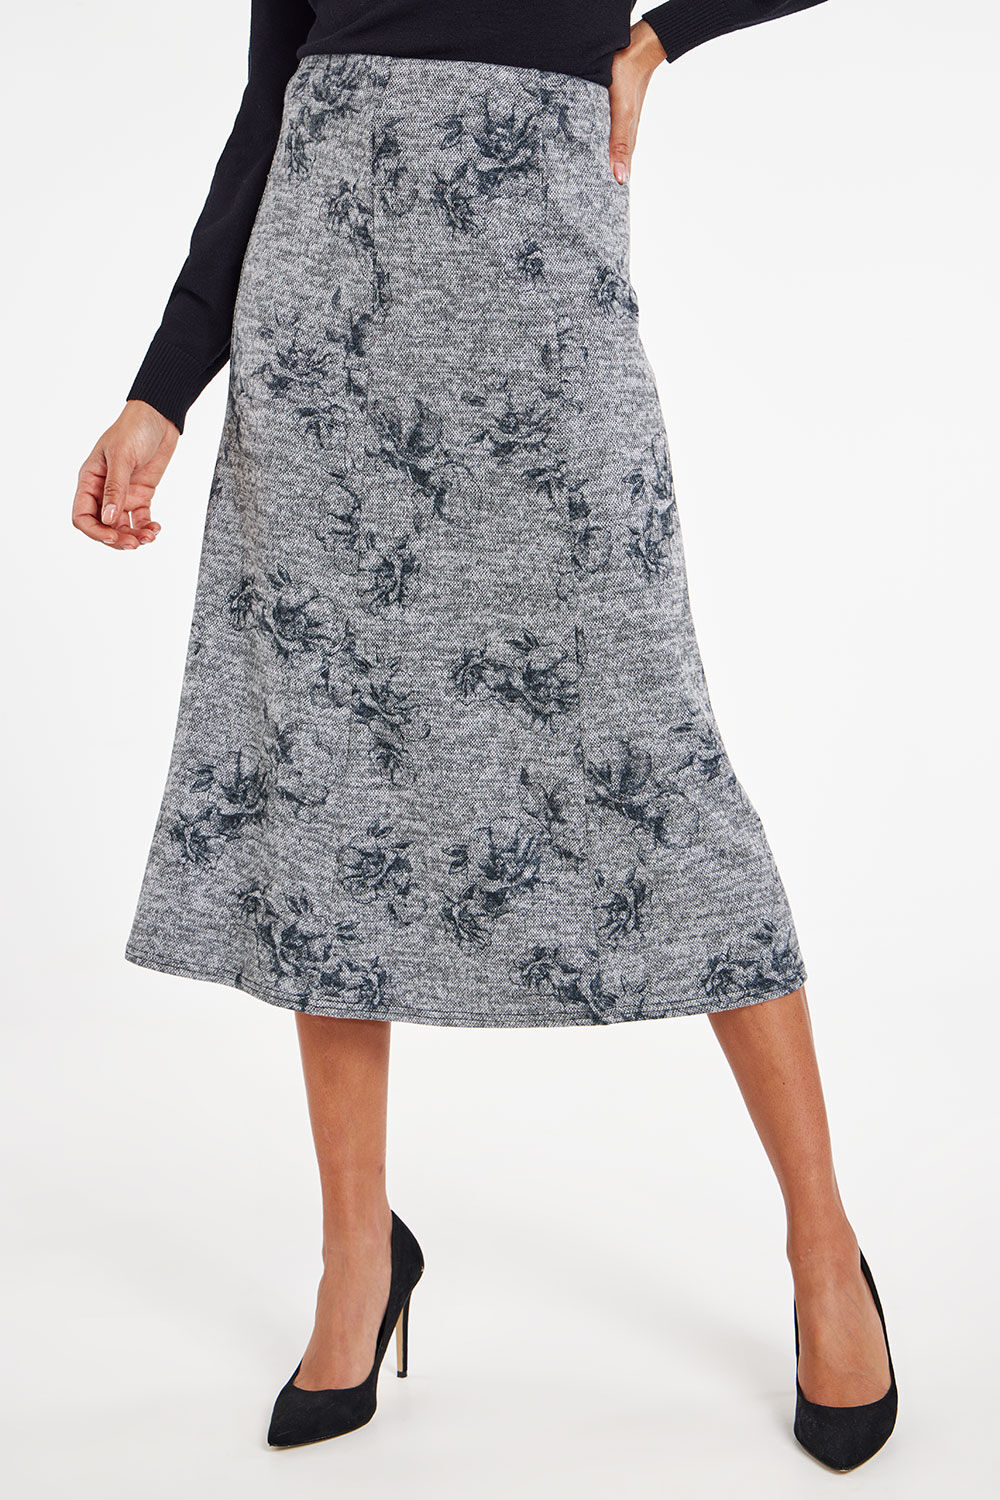 Bonmarche Grey Floral Soft Touch Elasticated Skirt, Size: 26